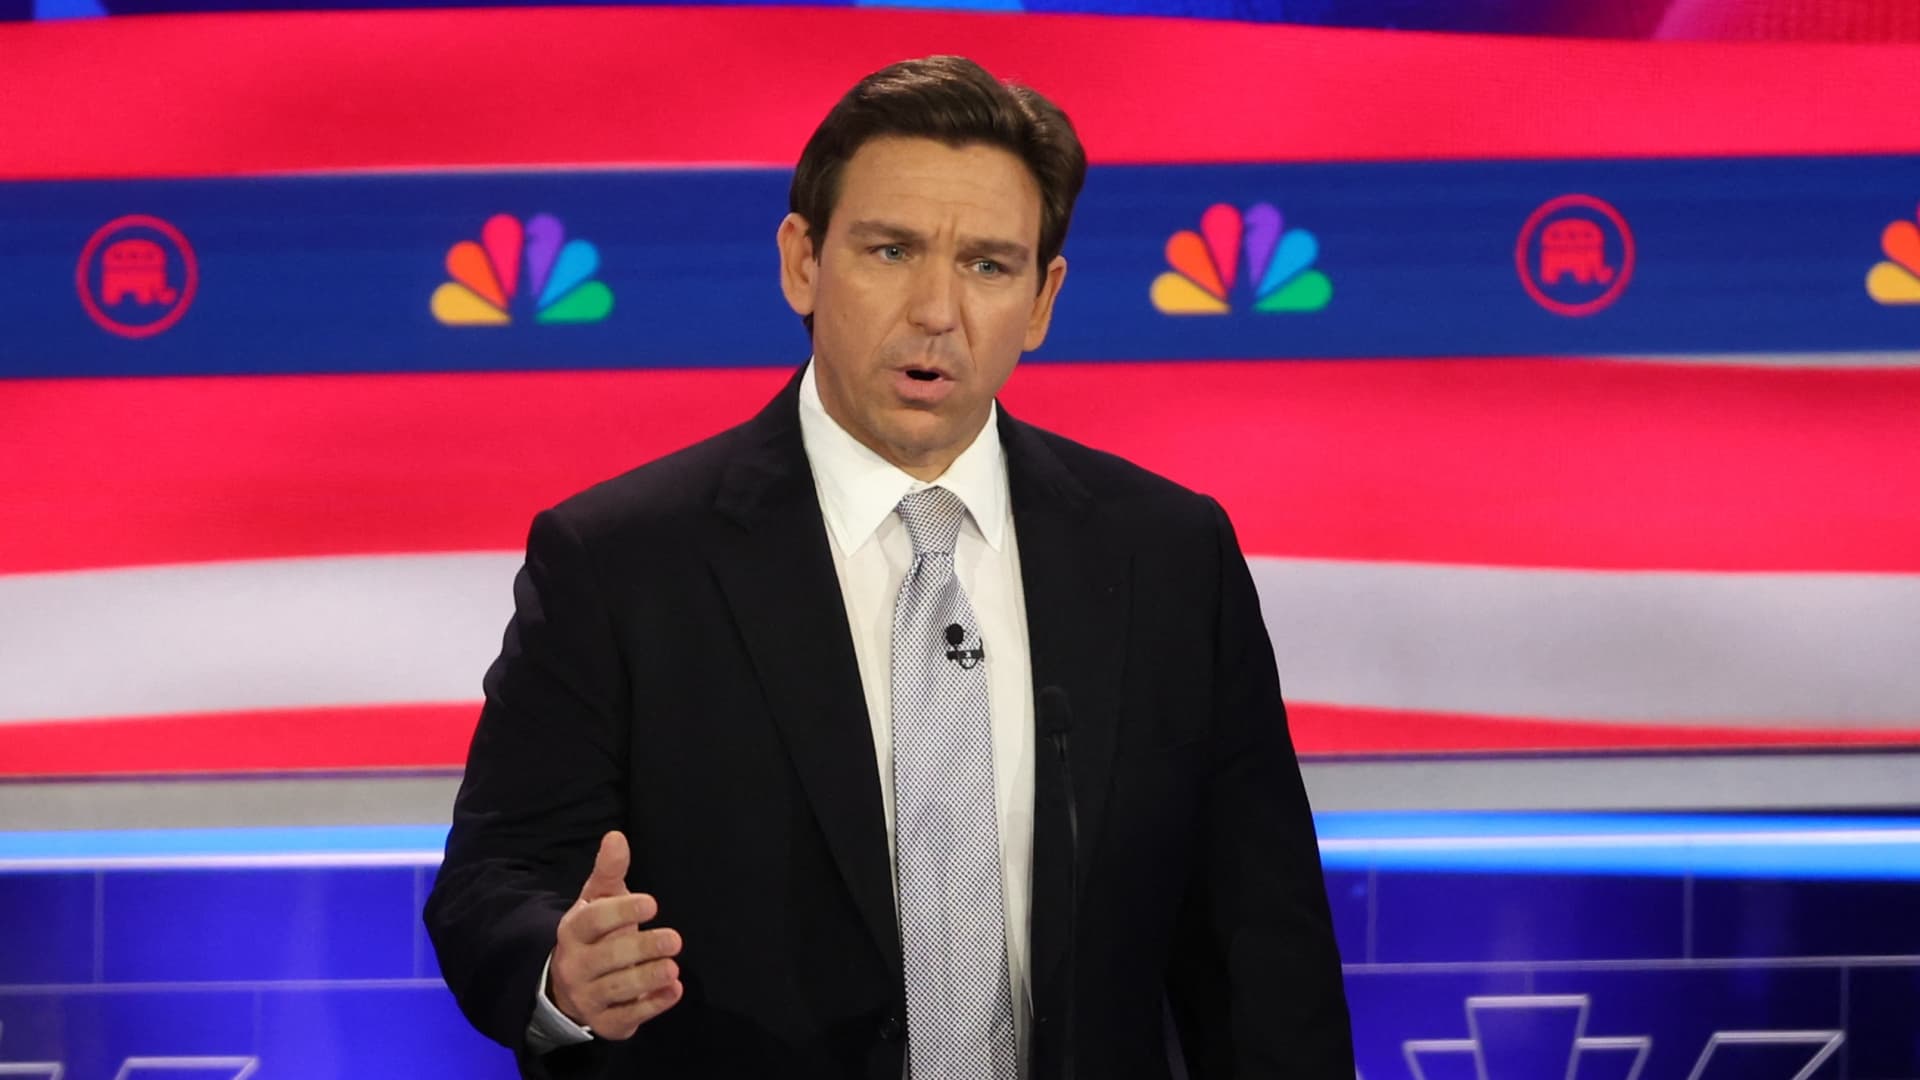 Florida Governor Ron DeSantis speaks at the third Republican candidates' U.S. presidential debate of the 2024 U.S. presidential campaign hosted by NBC News at the Adrienne Arsht Center for the Performing Arts in Miami, Florida, U.S., November 8, 2023. 